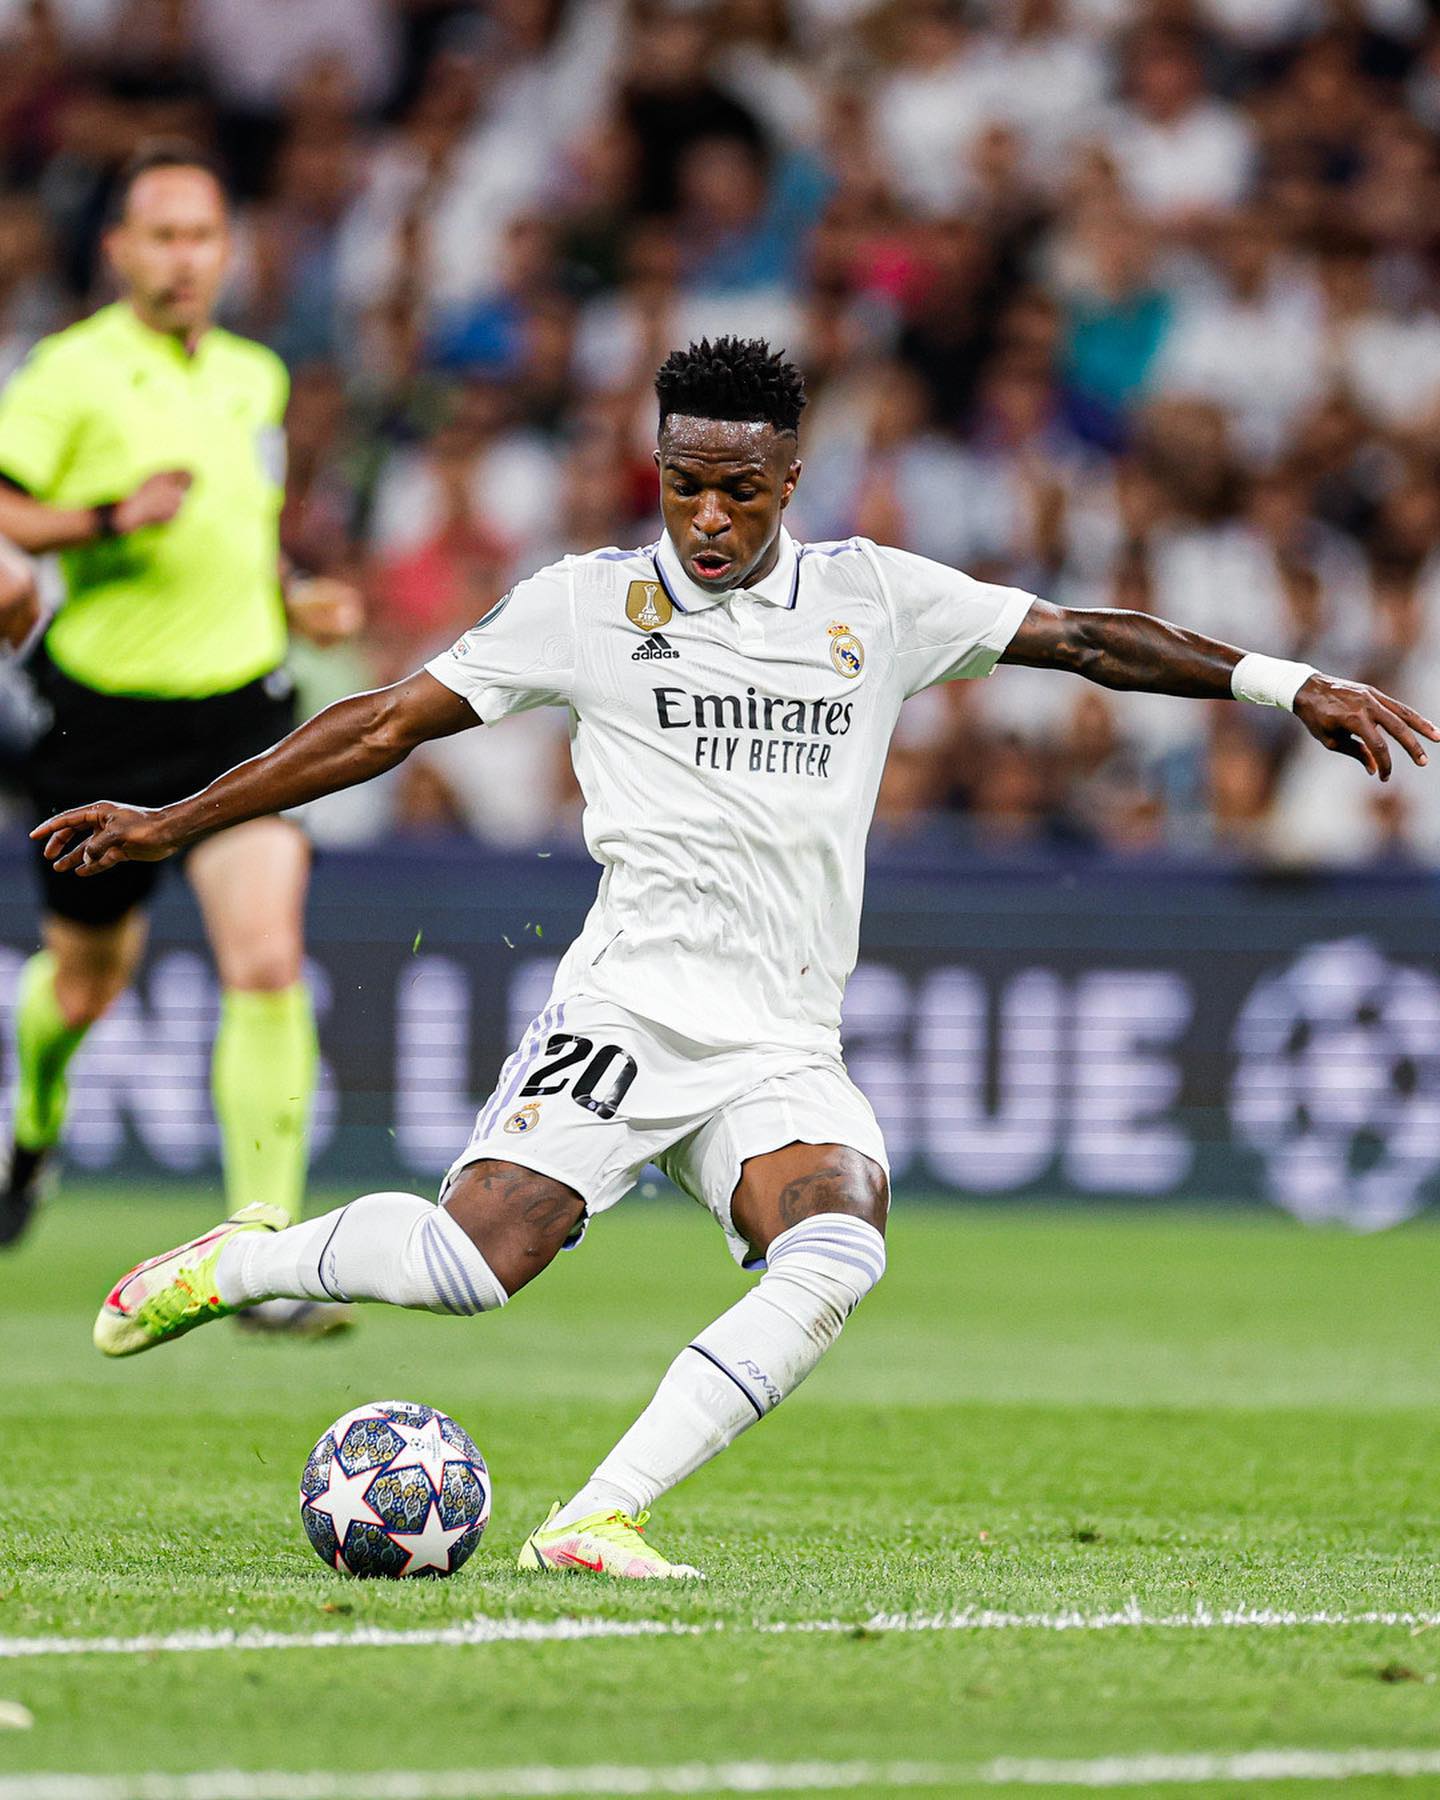 Vinícius Jr. kicking a soccer ball playing in a game for Real Madrid